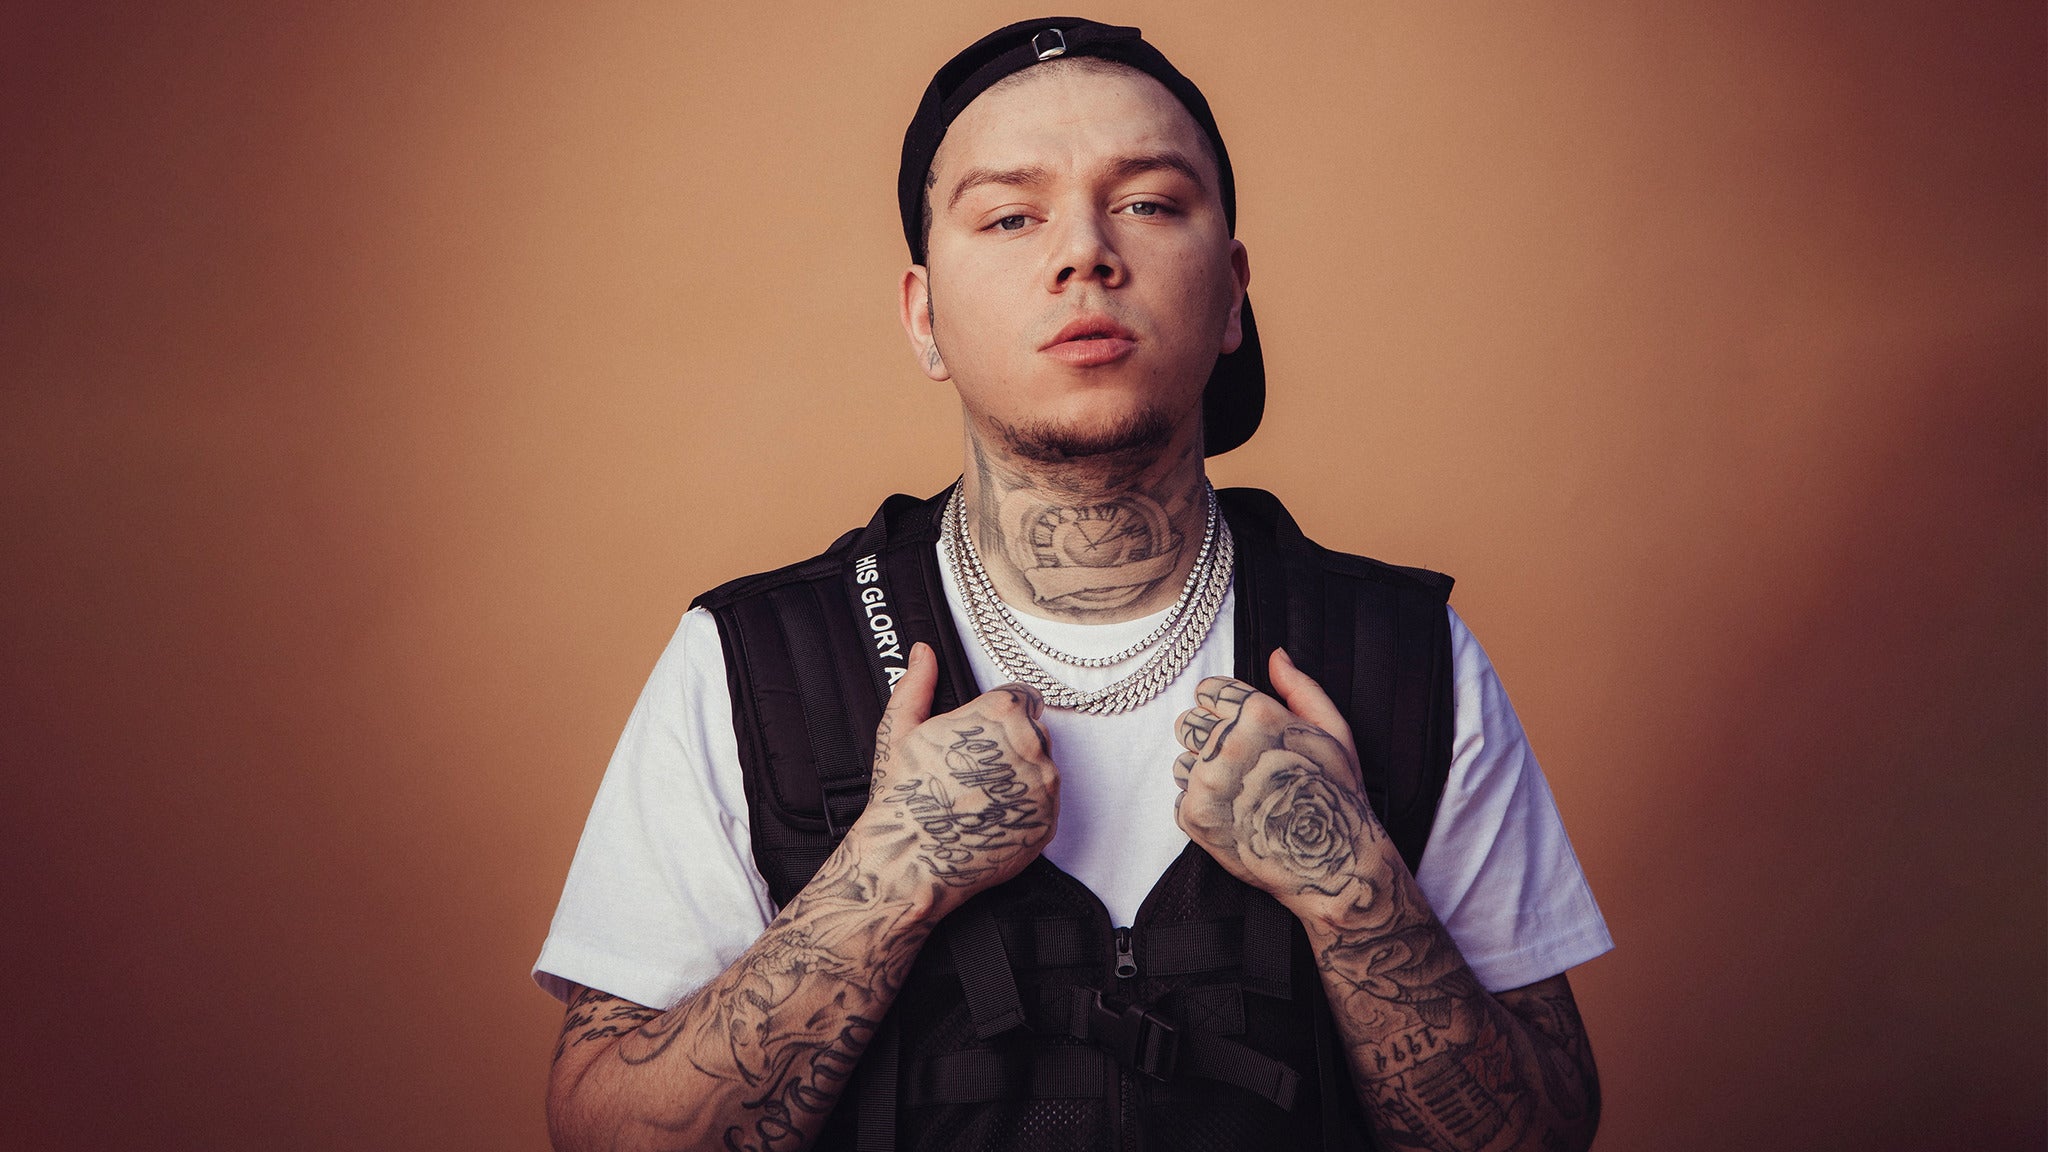 Main image for event titled Phora - Saints and Sinners Tour